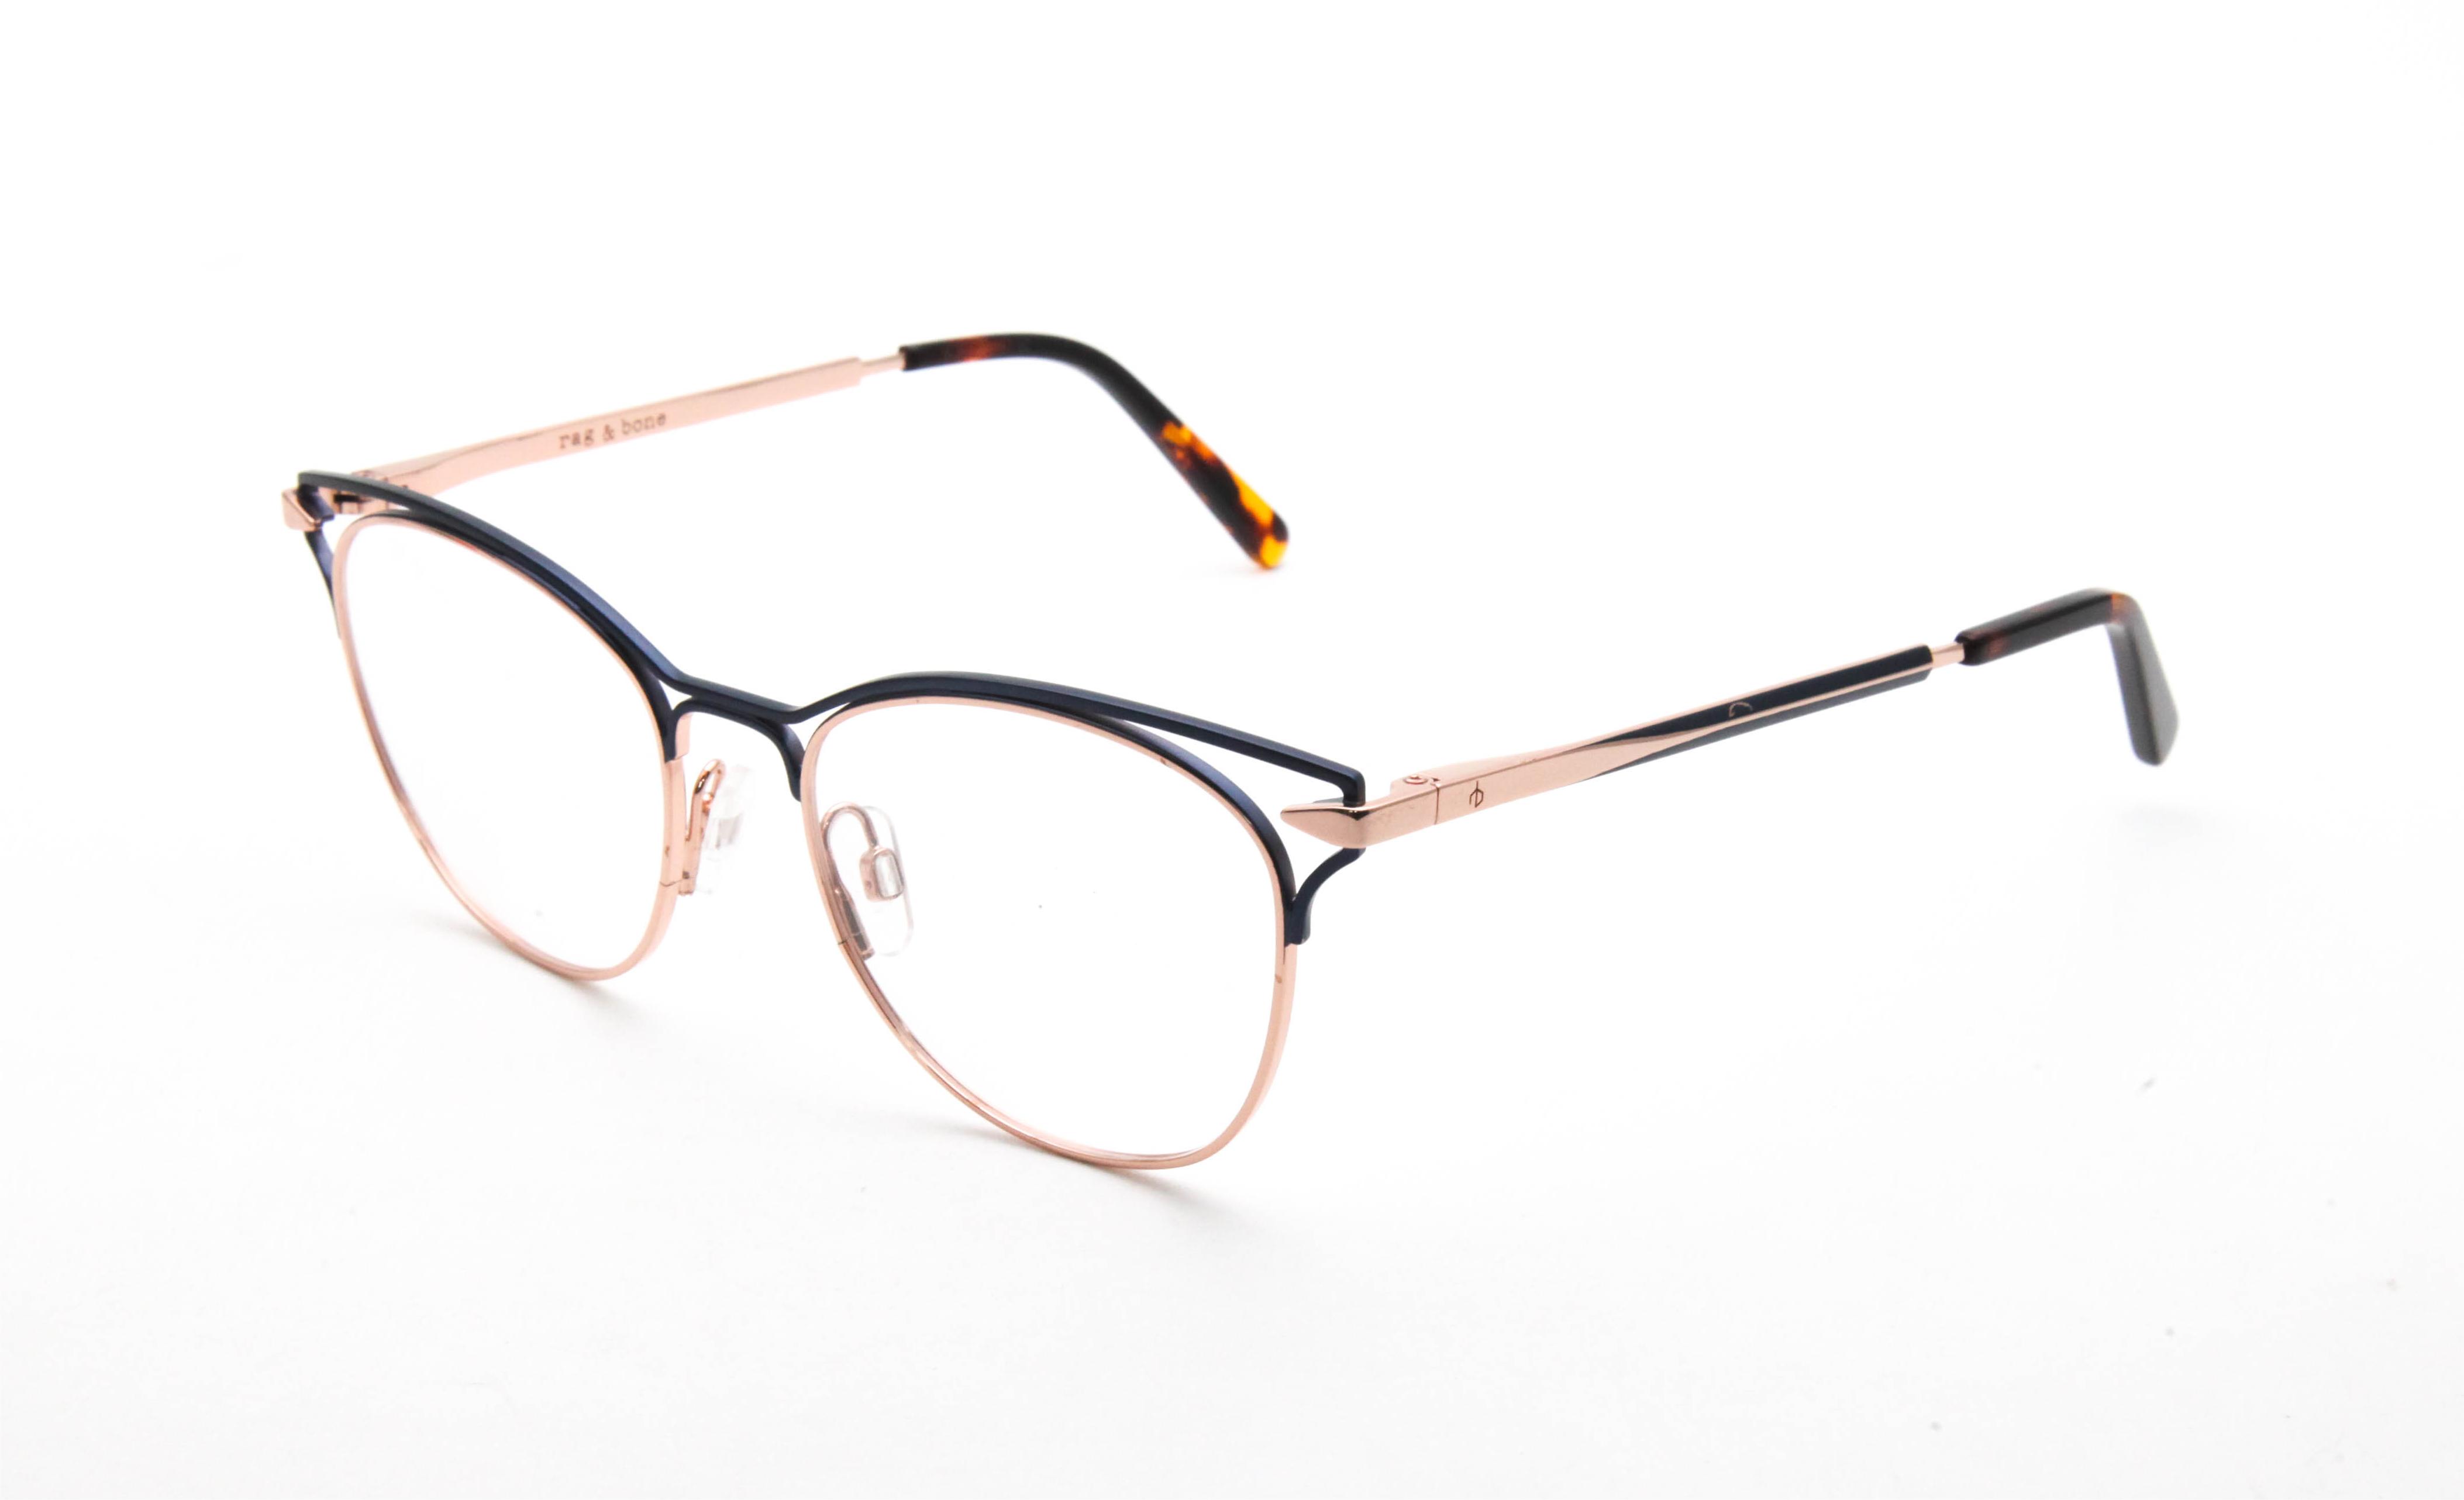 The Advantages of Wearing High-Quality Eyeglasses